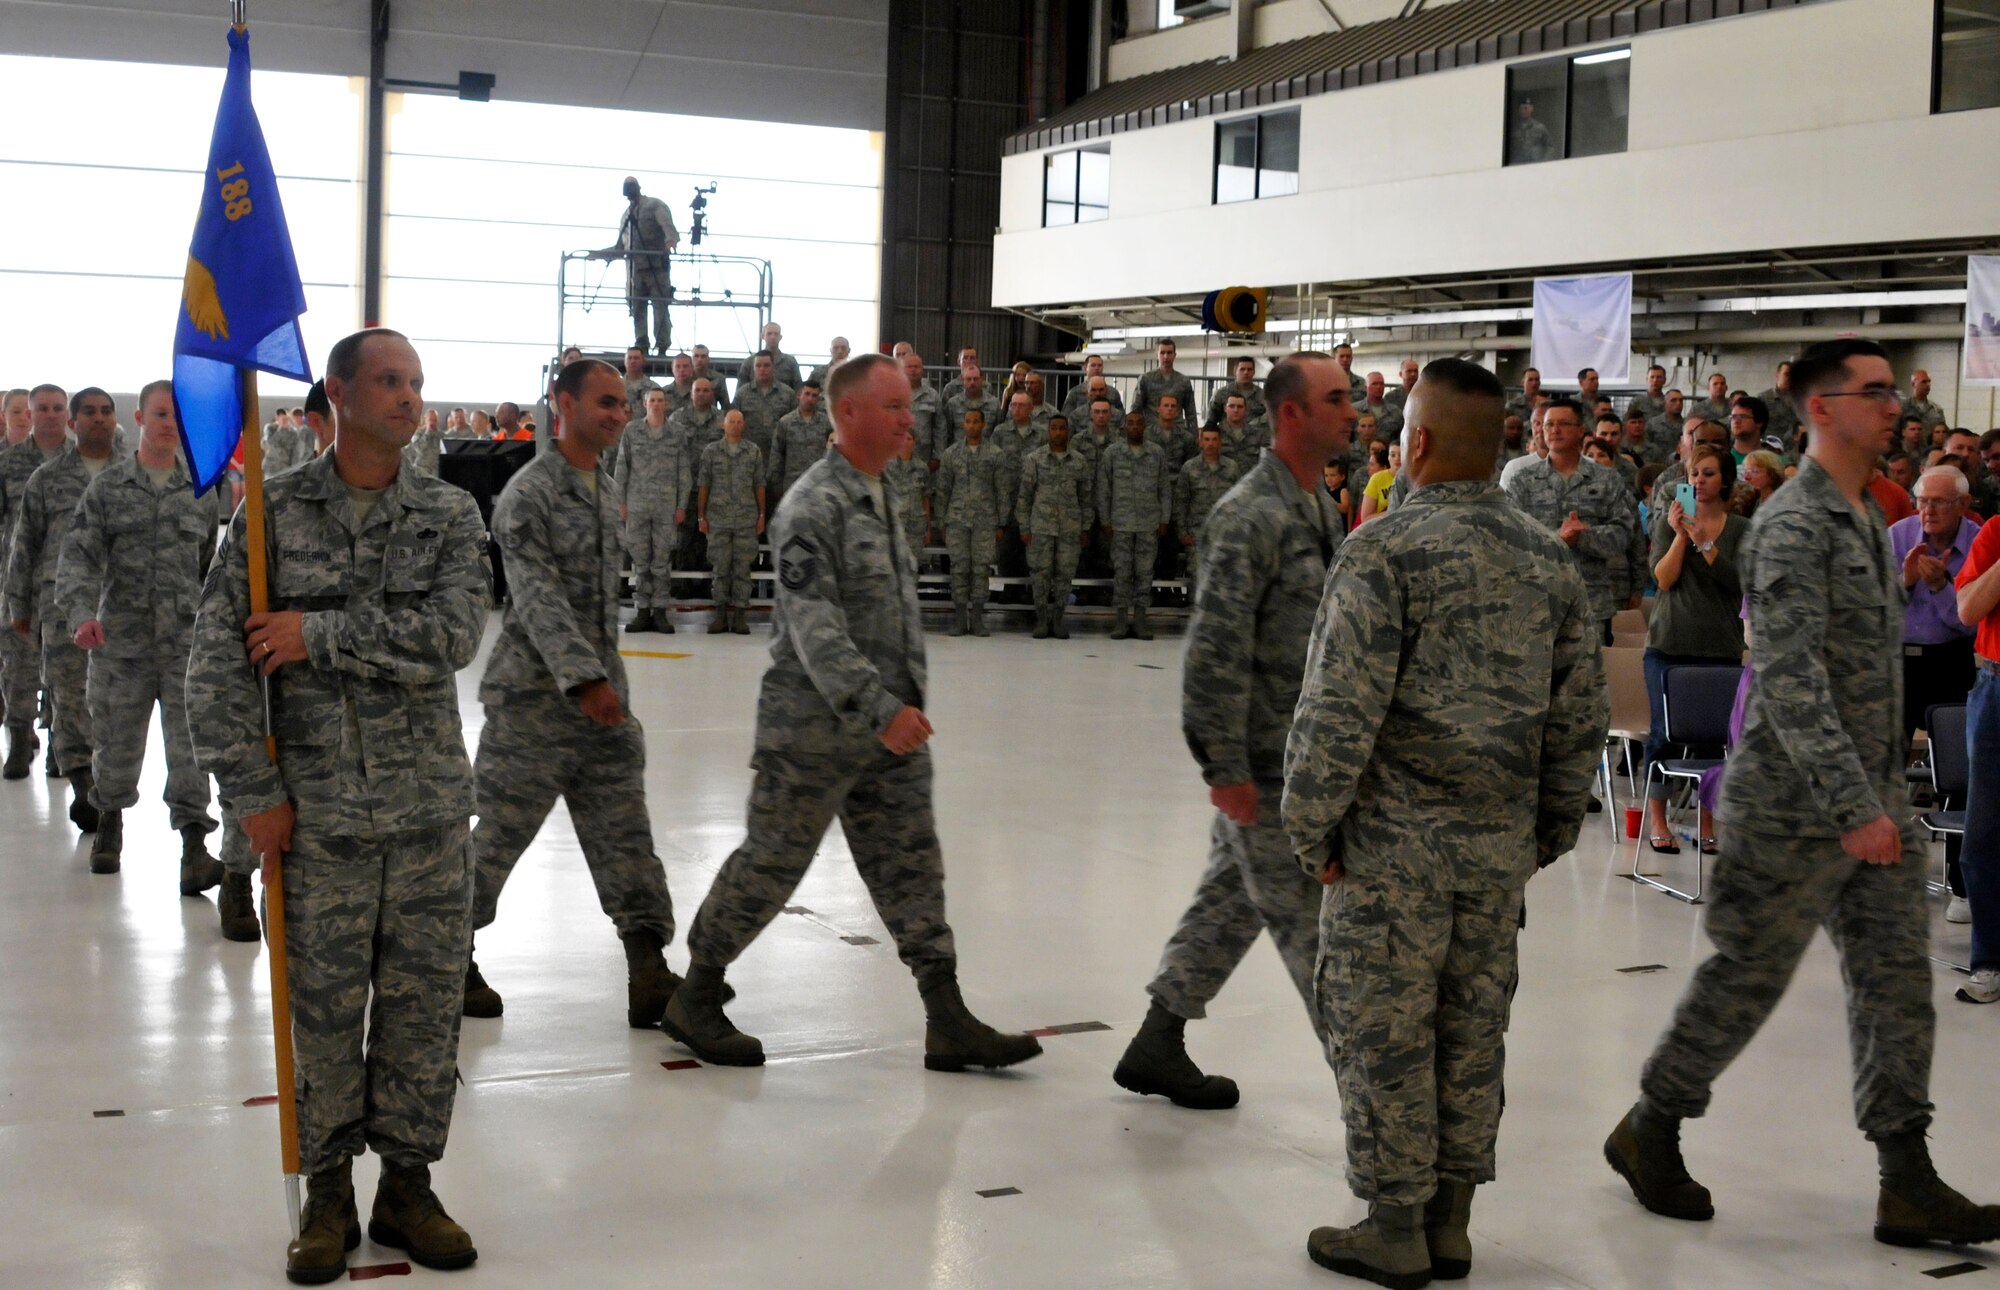 Members of the 188th Maintenance Group march from their formations following the group’s inactivation during the 188th Wing’s Conversion Day ceremony June 7. The 188th Maintenance Group, 188th Maintenance Squadron, 188th Aircraft Maintenance Squadron and 188th Maintenance Operations Flight were inactivated as a result of the 188th’s conversion to a remotely piloted aircraft (MQ-9 Reapers) and intelligence, surveillance and reconnaissance mission. (U.S. Air National Guard photo by Airman 1st Class Cody Martin)